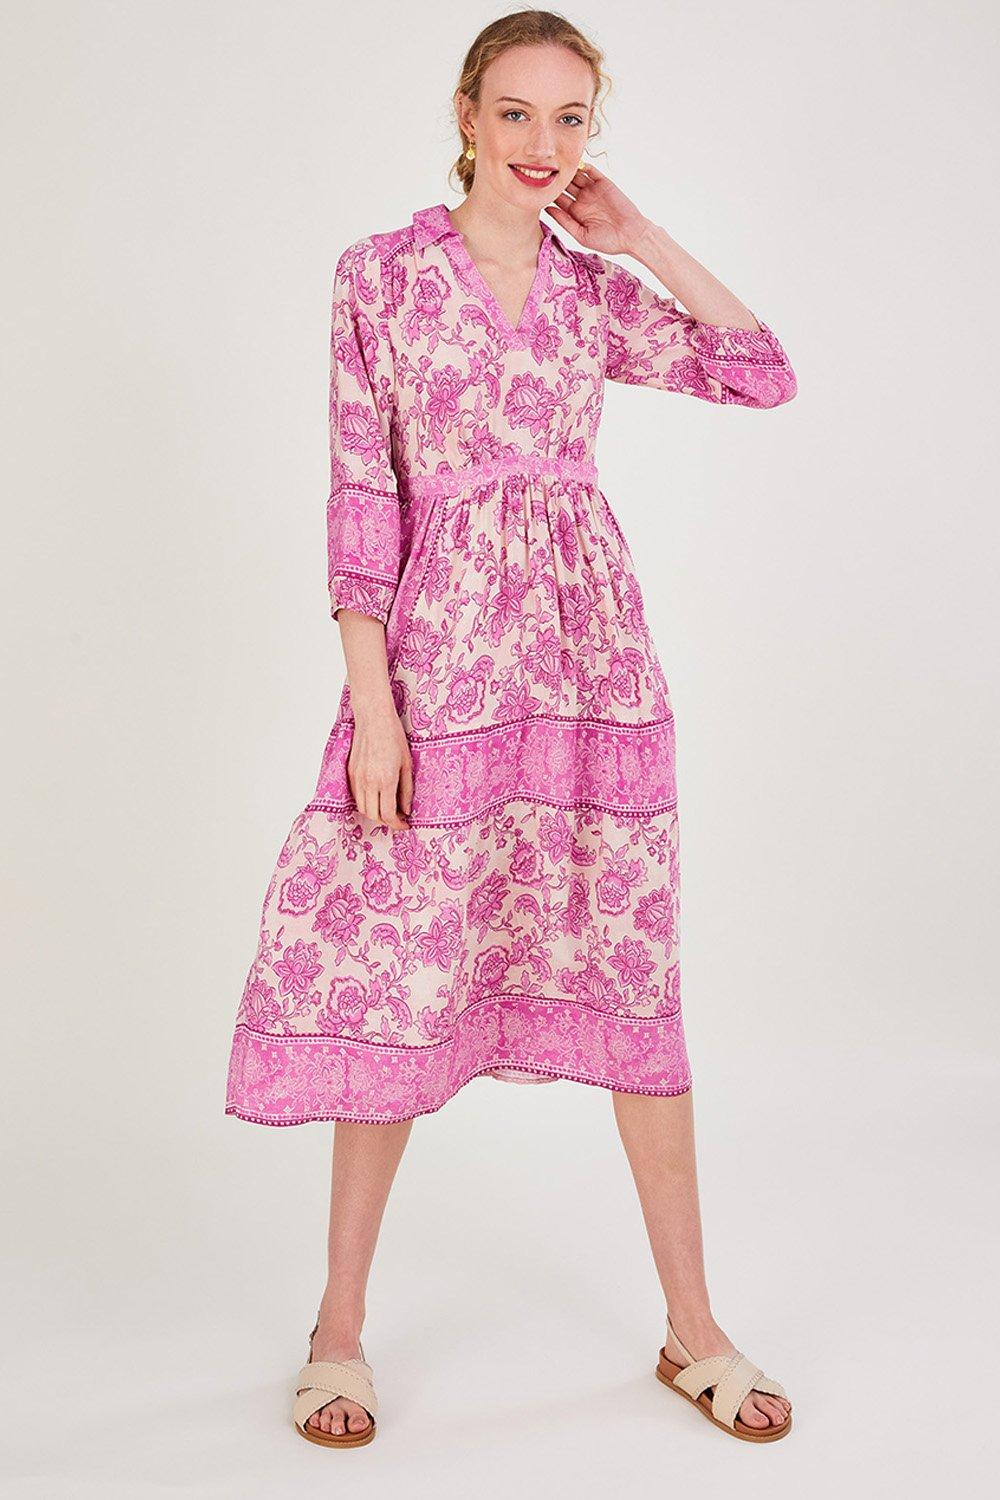 'Pia' Placement Print Dress